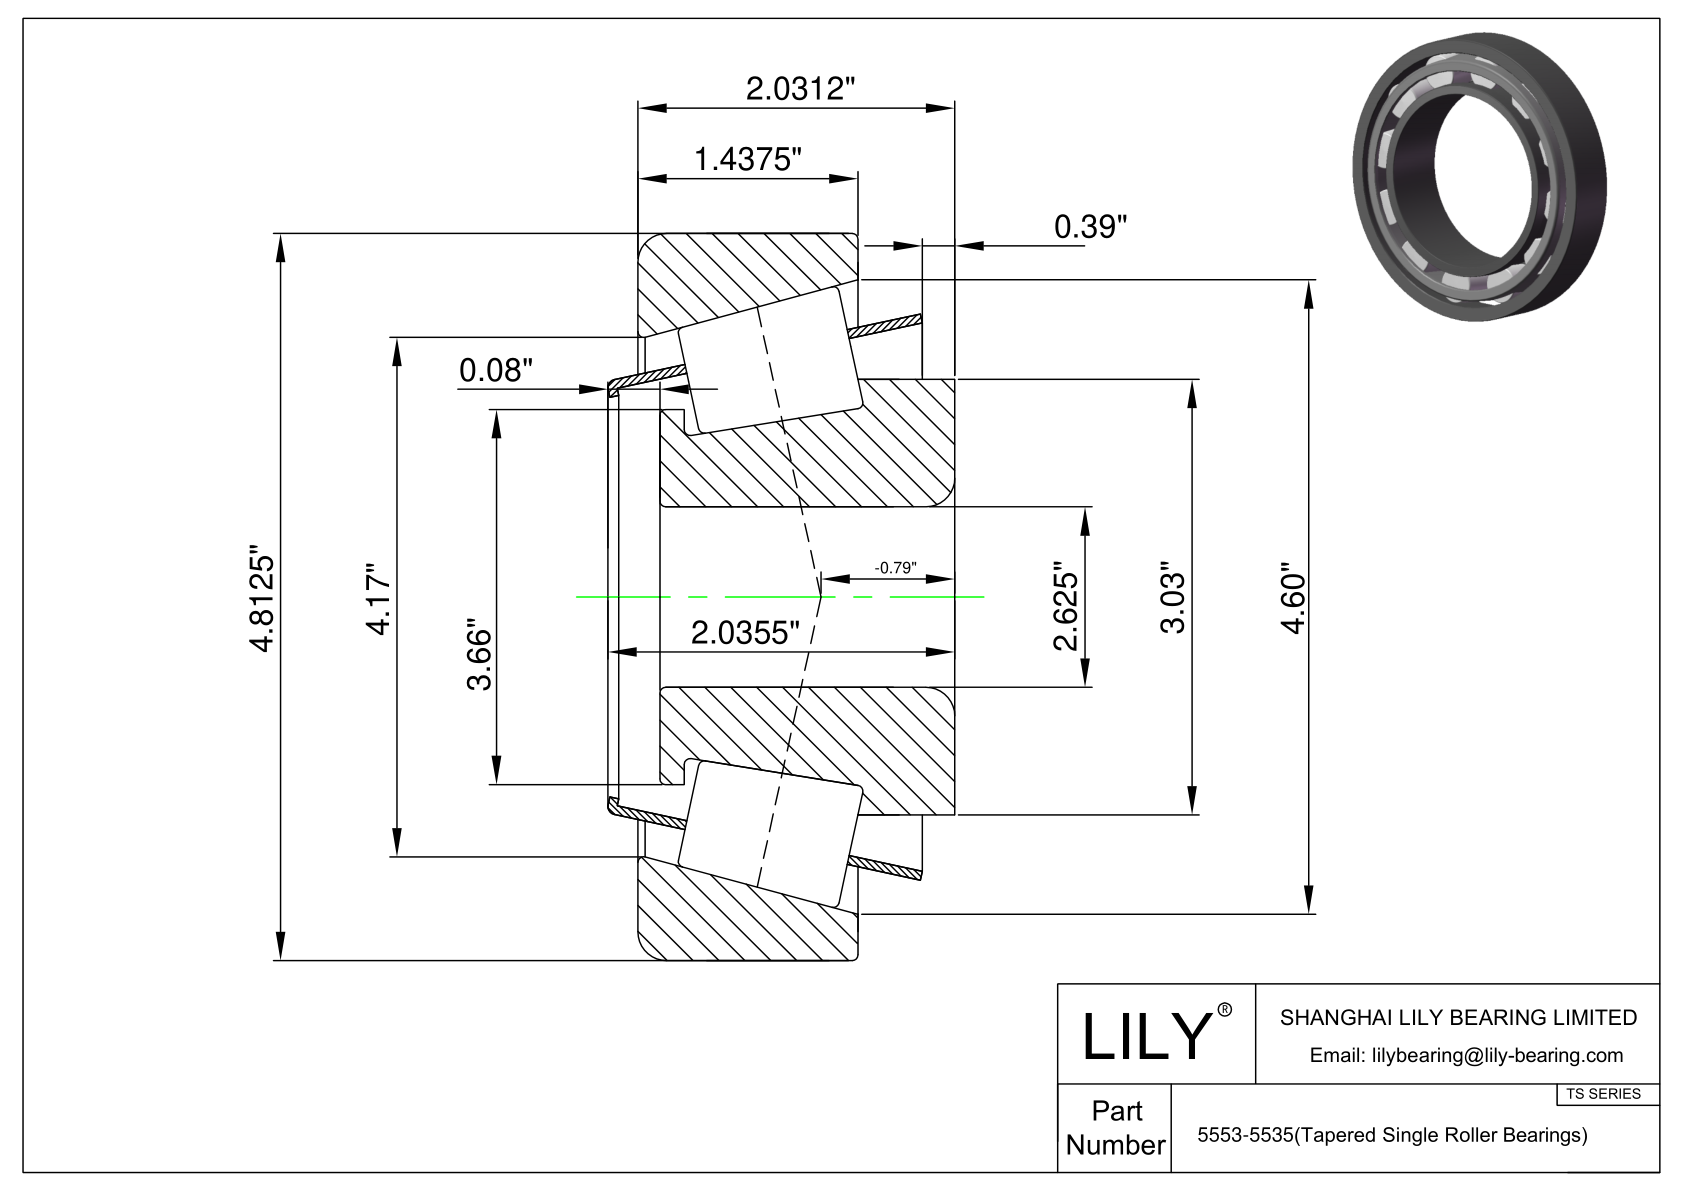 5553-5535 TS (Tapered Single Roller Bearings) (Imperial) cad drawing